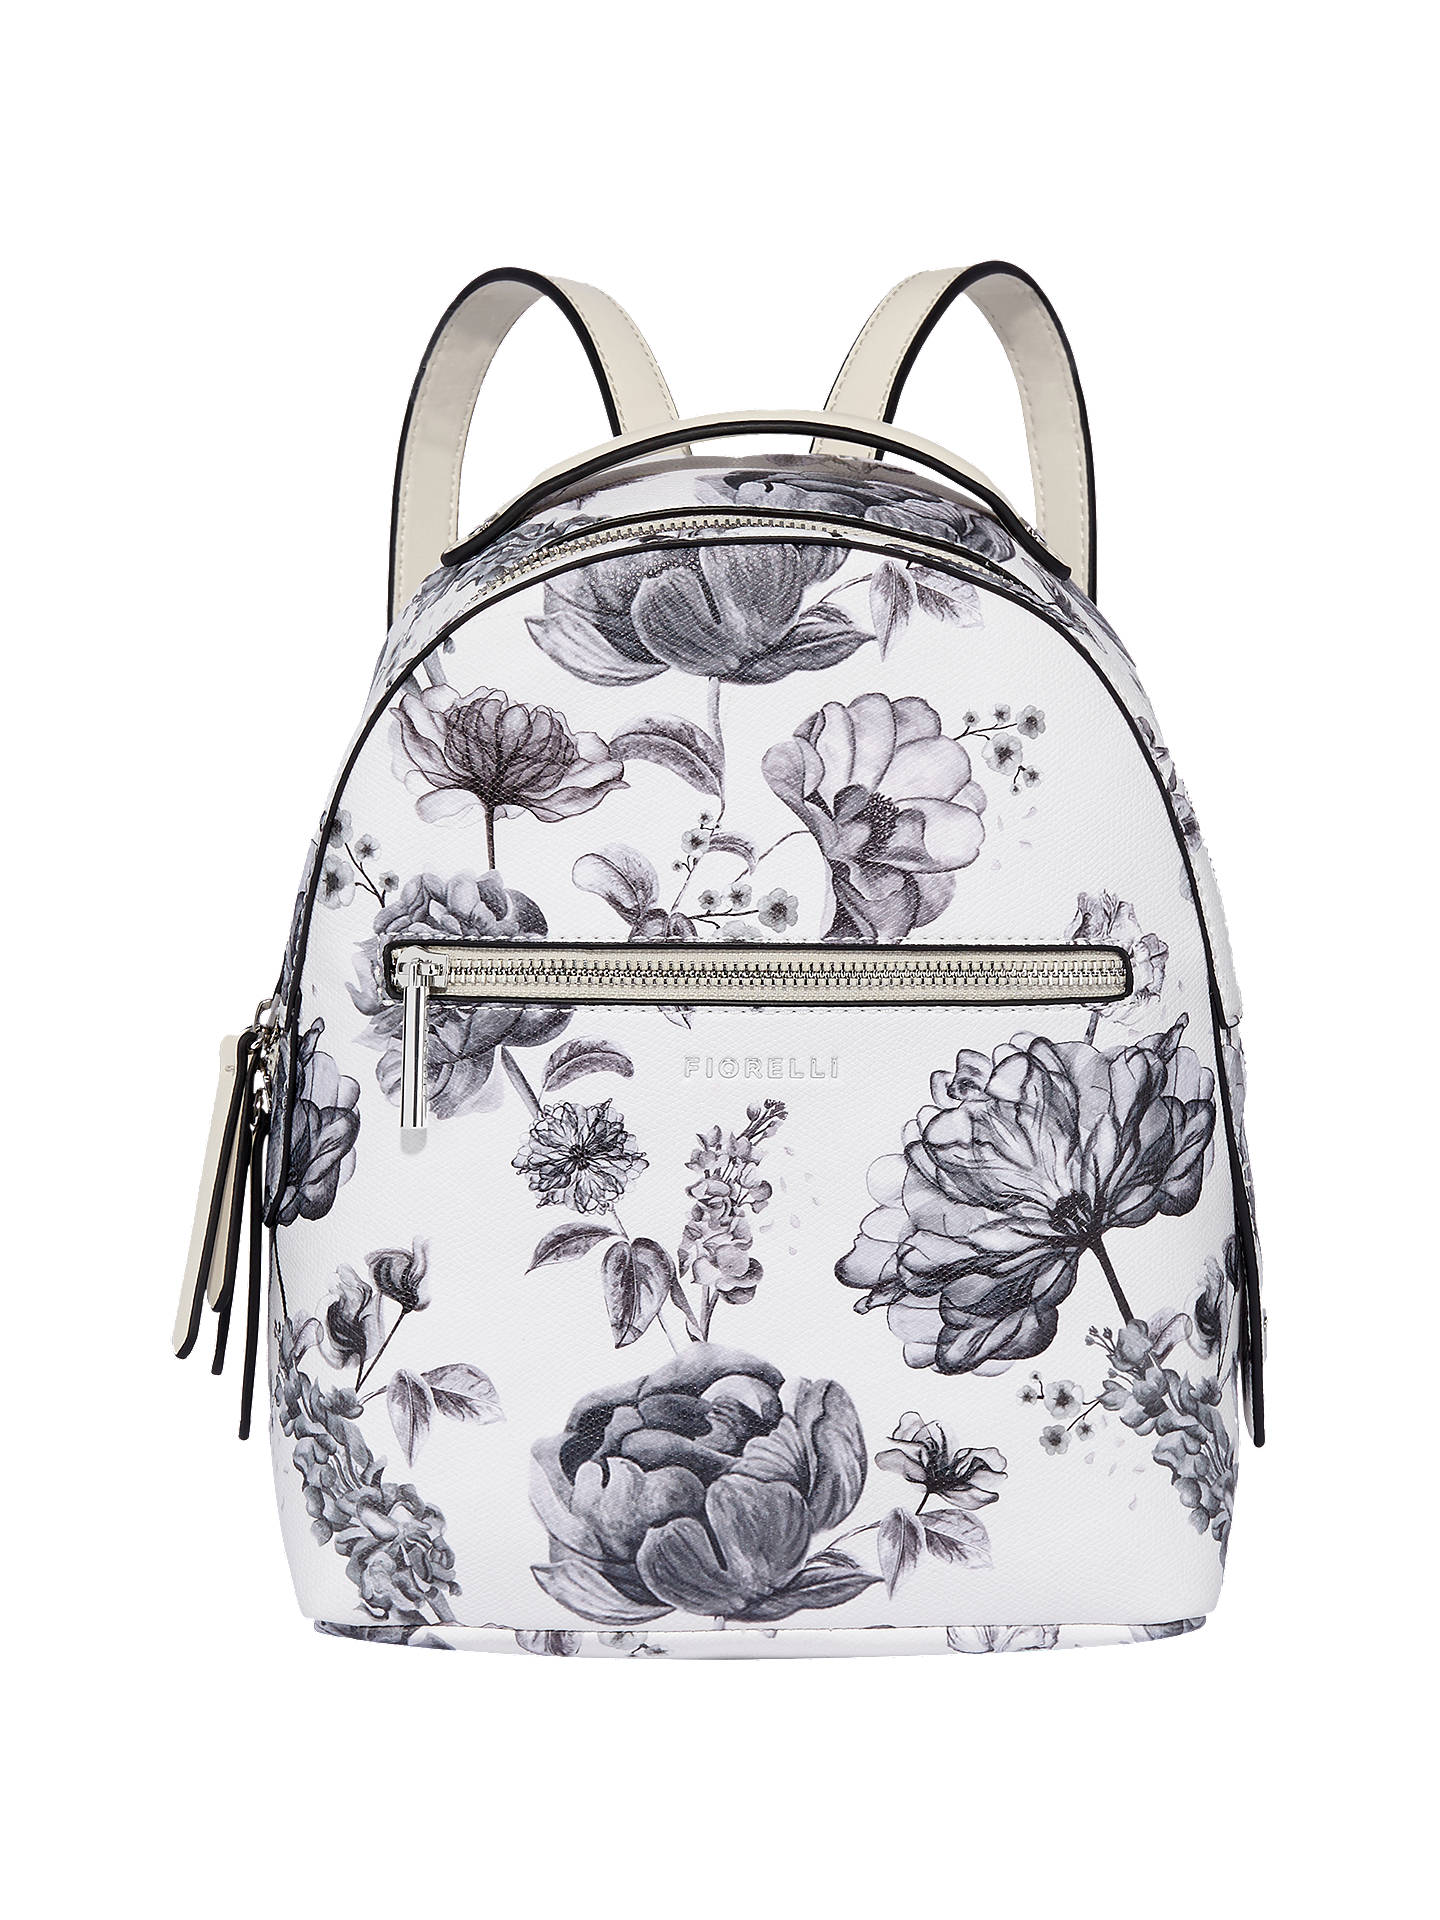 Fiorelli Anouk Small Backpack at John Lewis & Partners